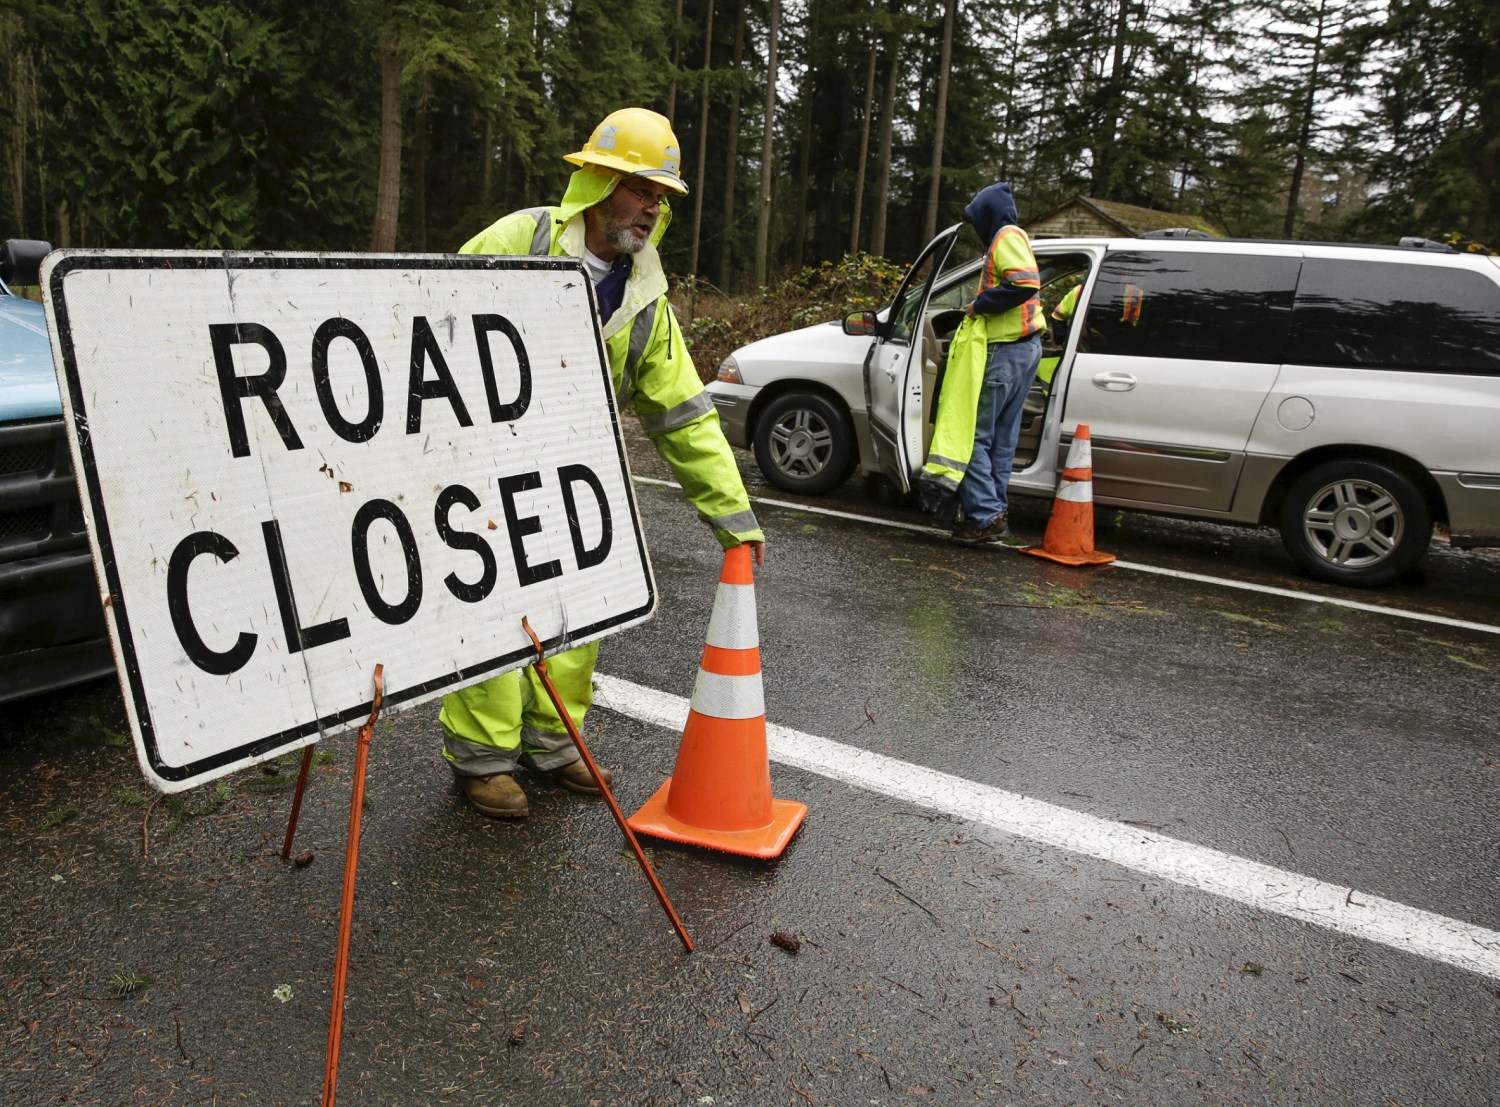 Workers keep a portion of Issaquah-Hobart Road Southeast closed to traffic as crews restore a damaged power pole in Issaquah, Washington December 10, 2015. Residents of the U.S. Pacific Northwest were hit by fresh storms on Thursday after the region received record-breaking rainfall that left two dead in Oregon and triggered widespread flooding, landslides, road closures and power cuts. REUTERS/Jason Redmond - GF10000261699